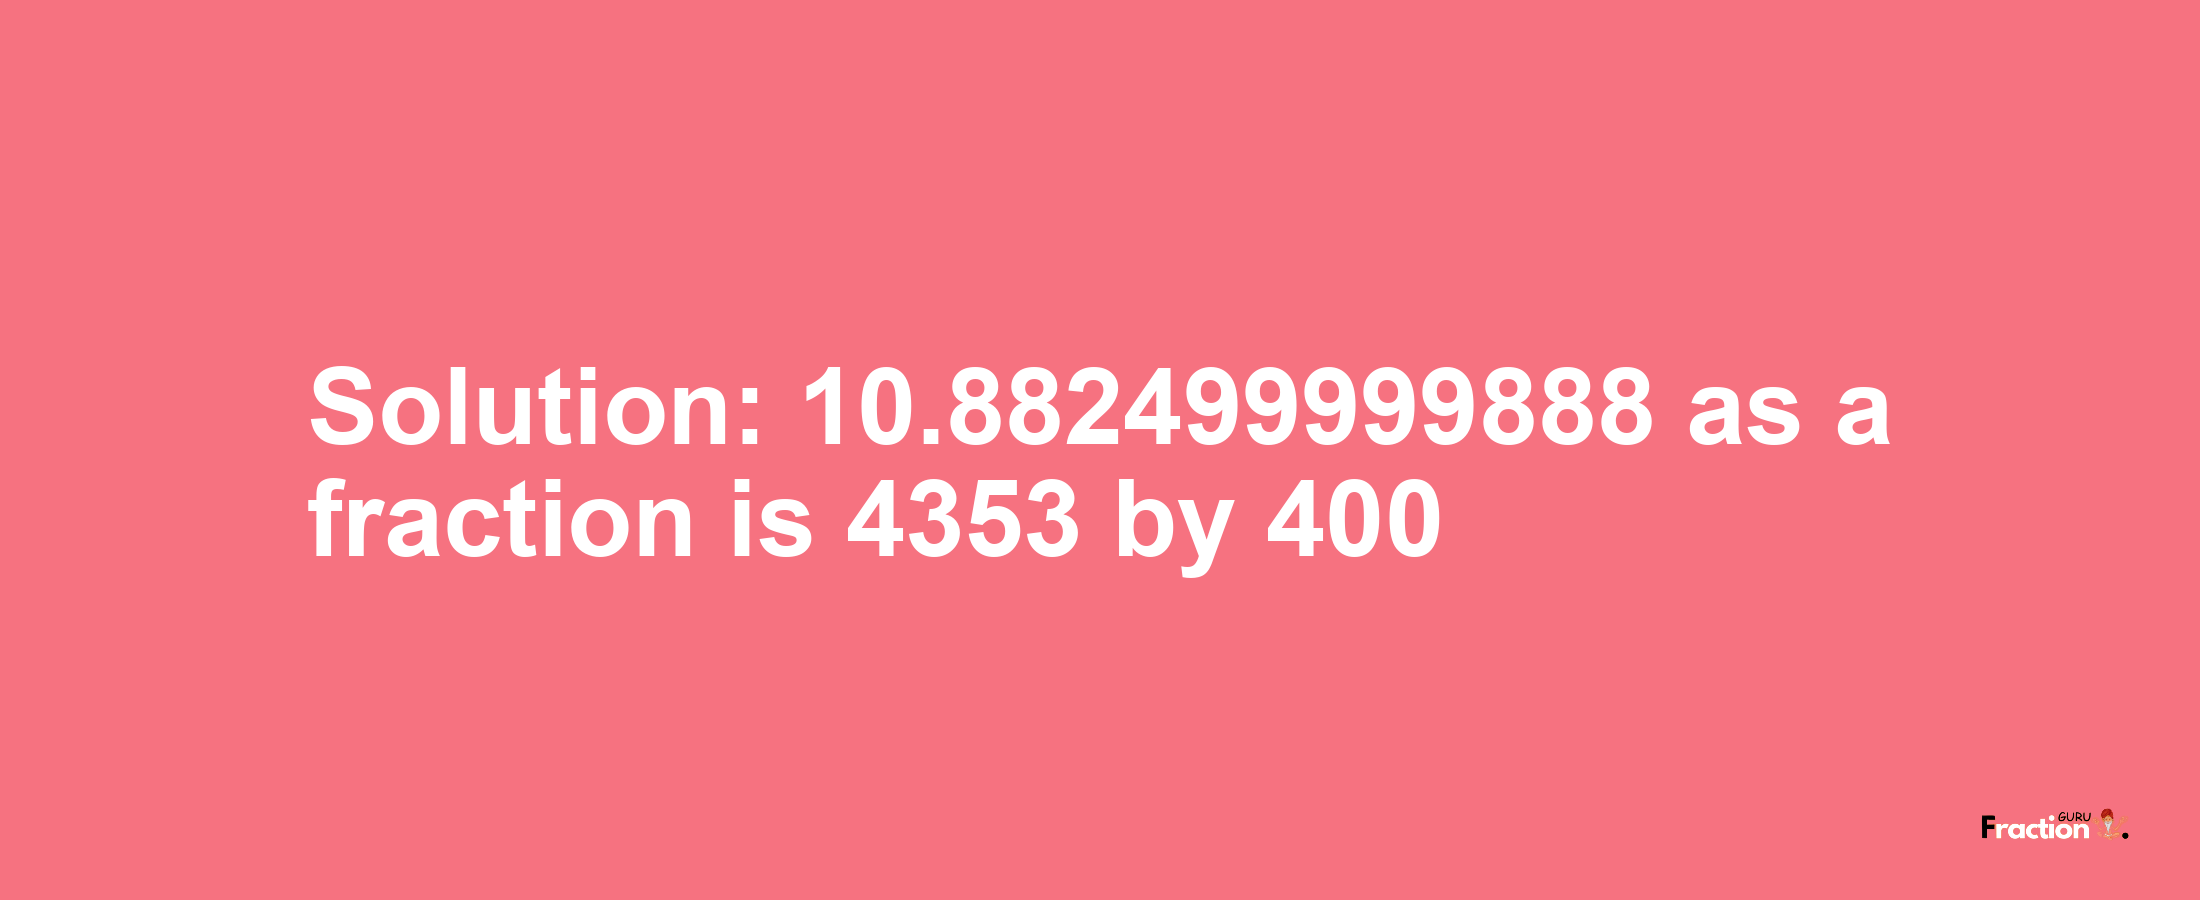 Solution:10.882499999888 as a fraction is 4353/400